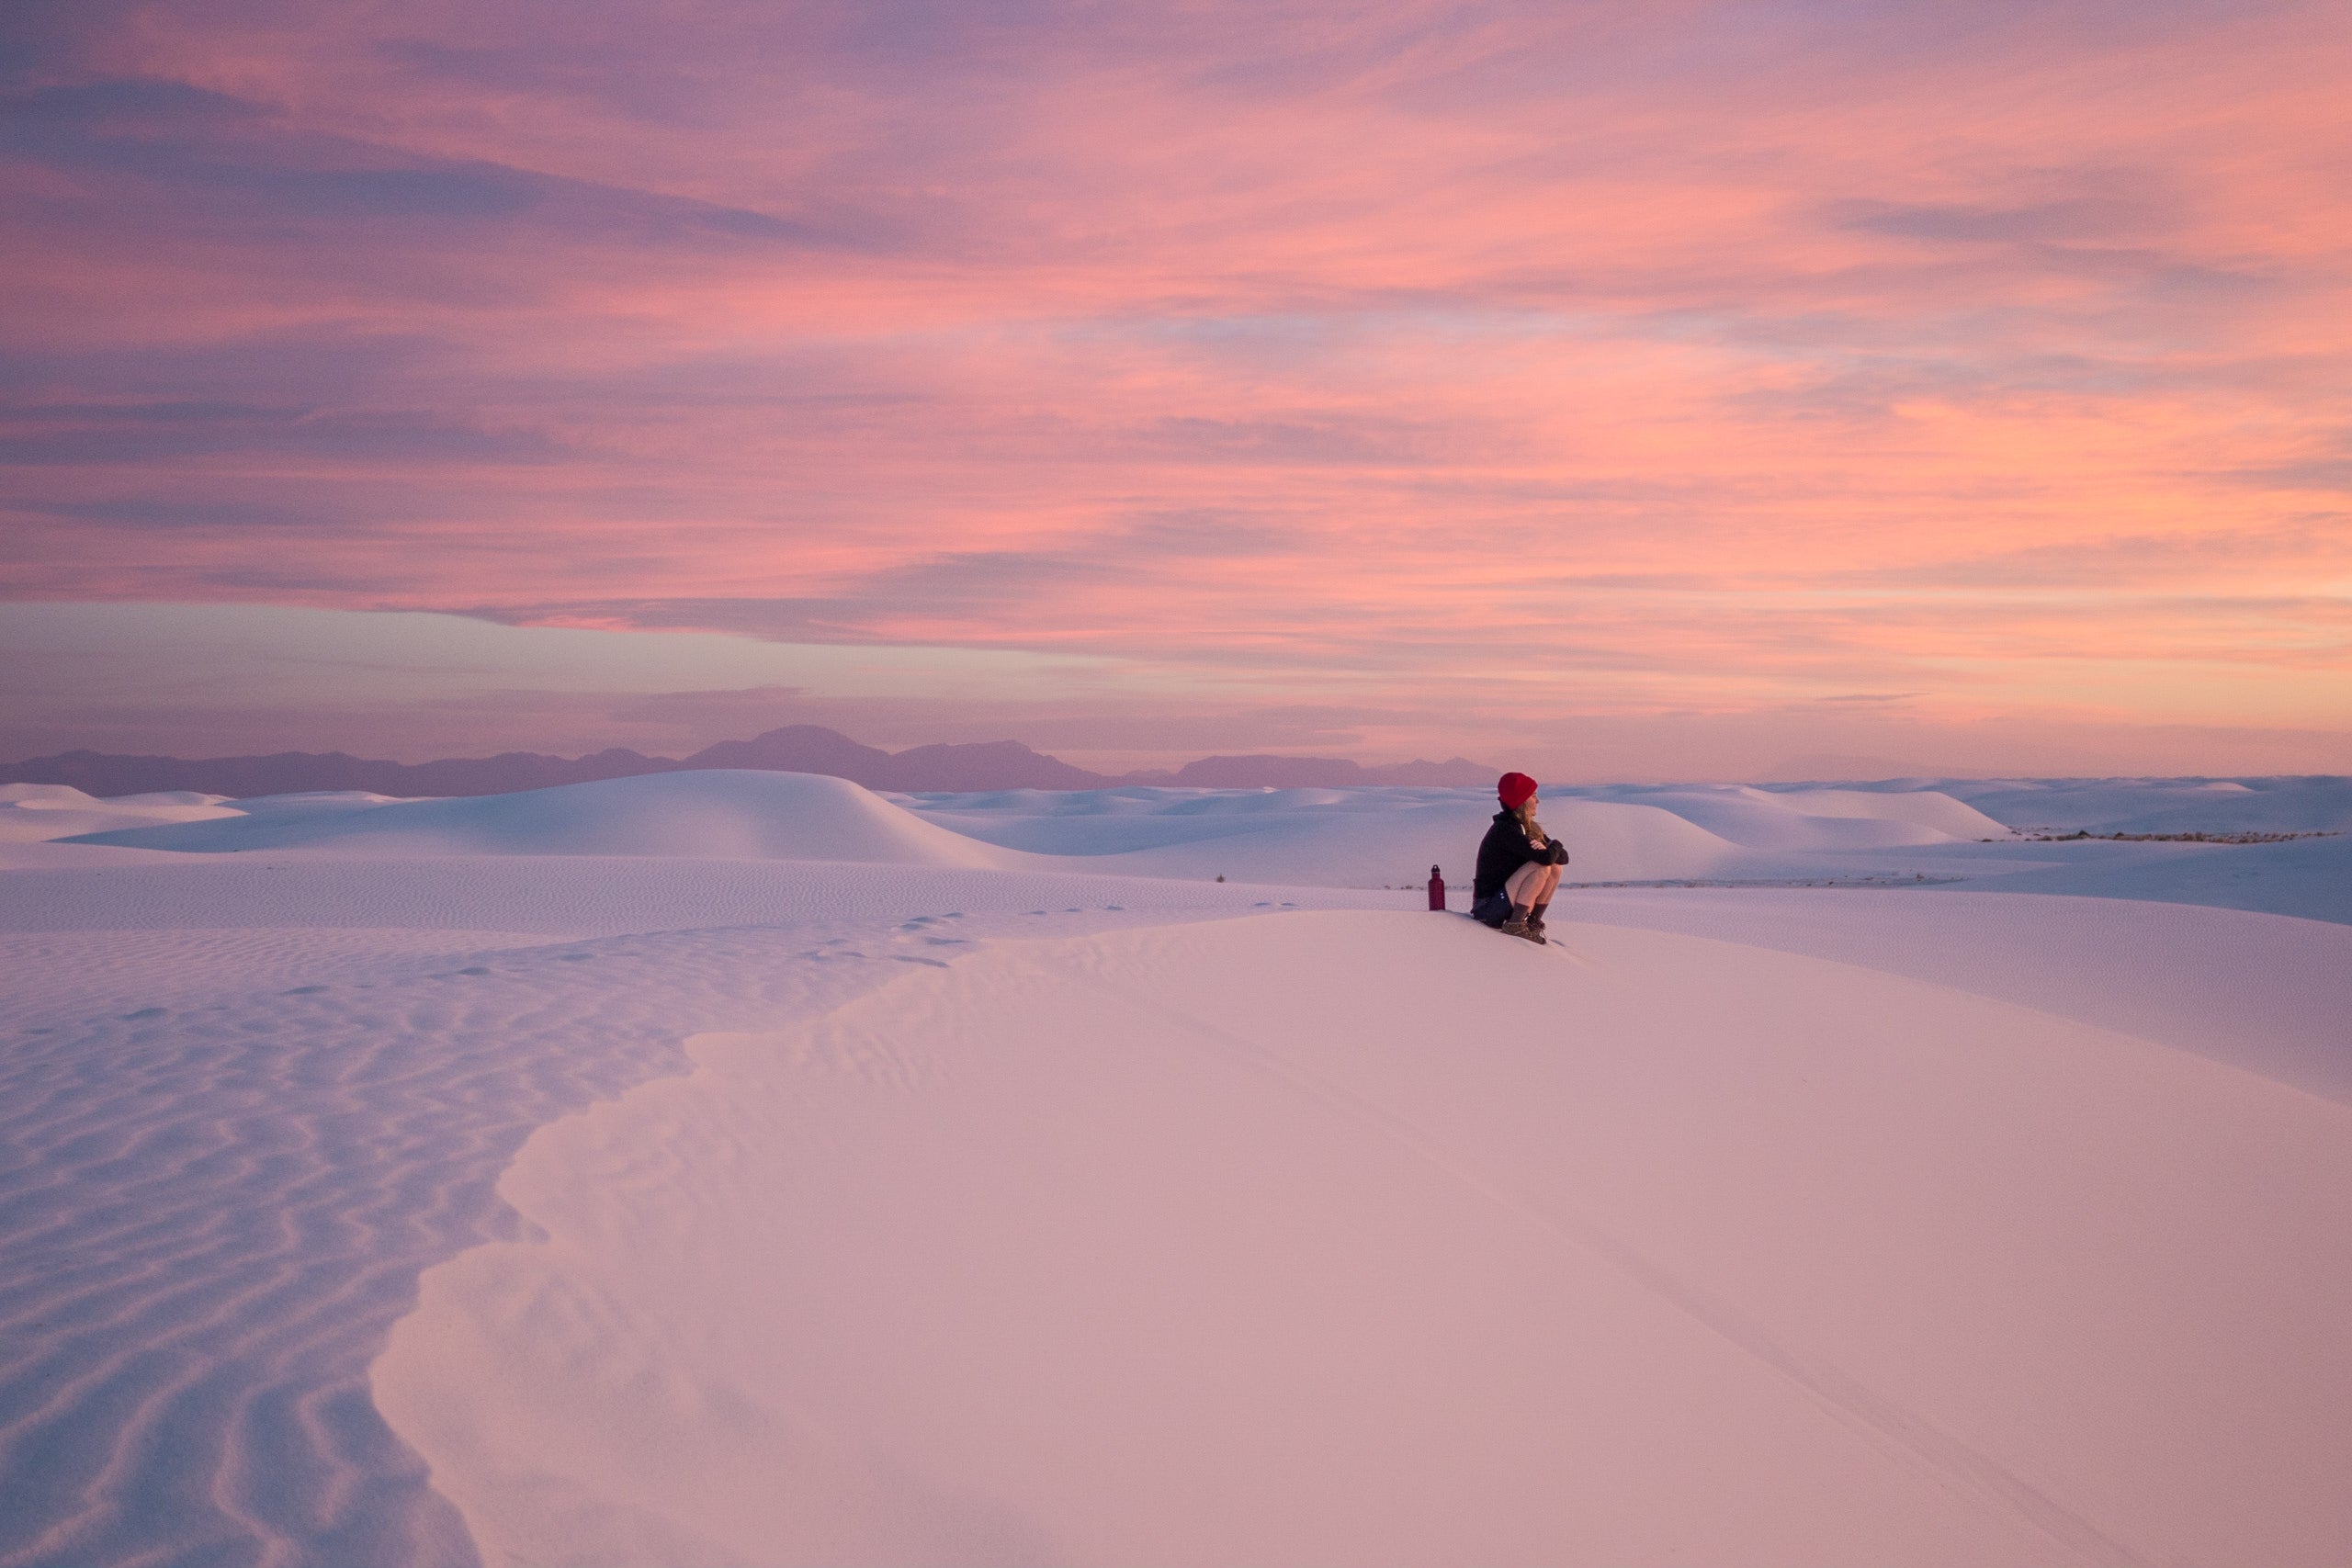 Watching the sunrise in White Sands National Park.